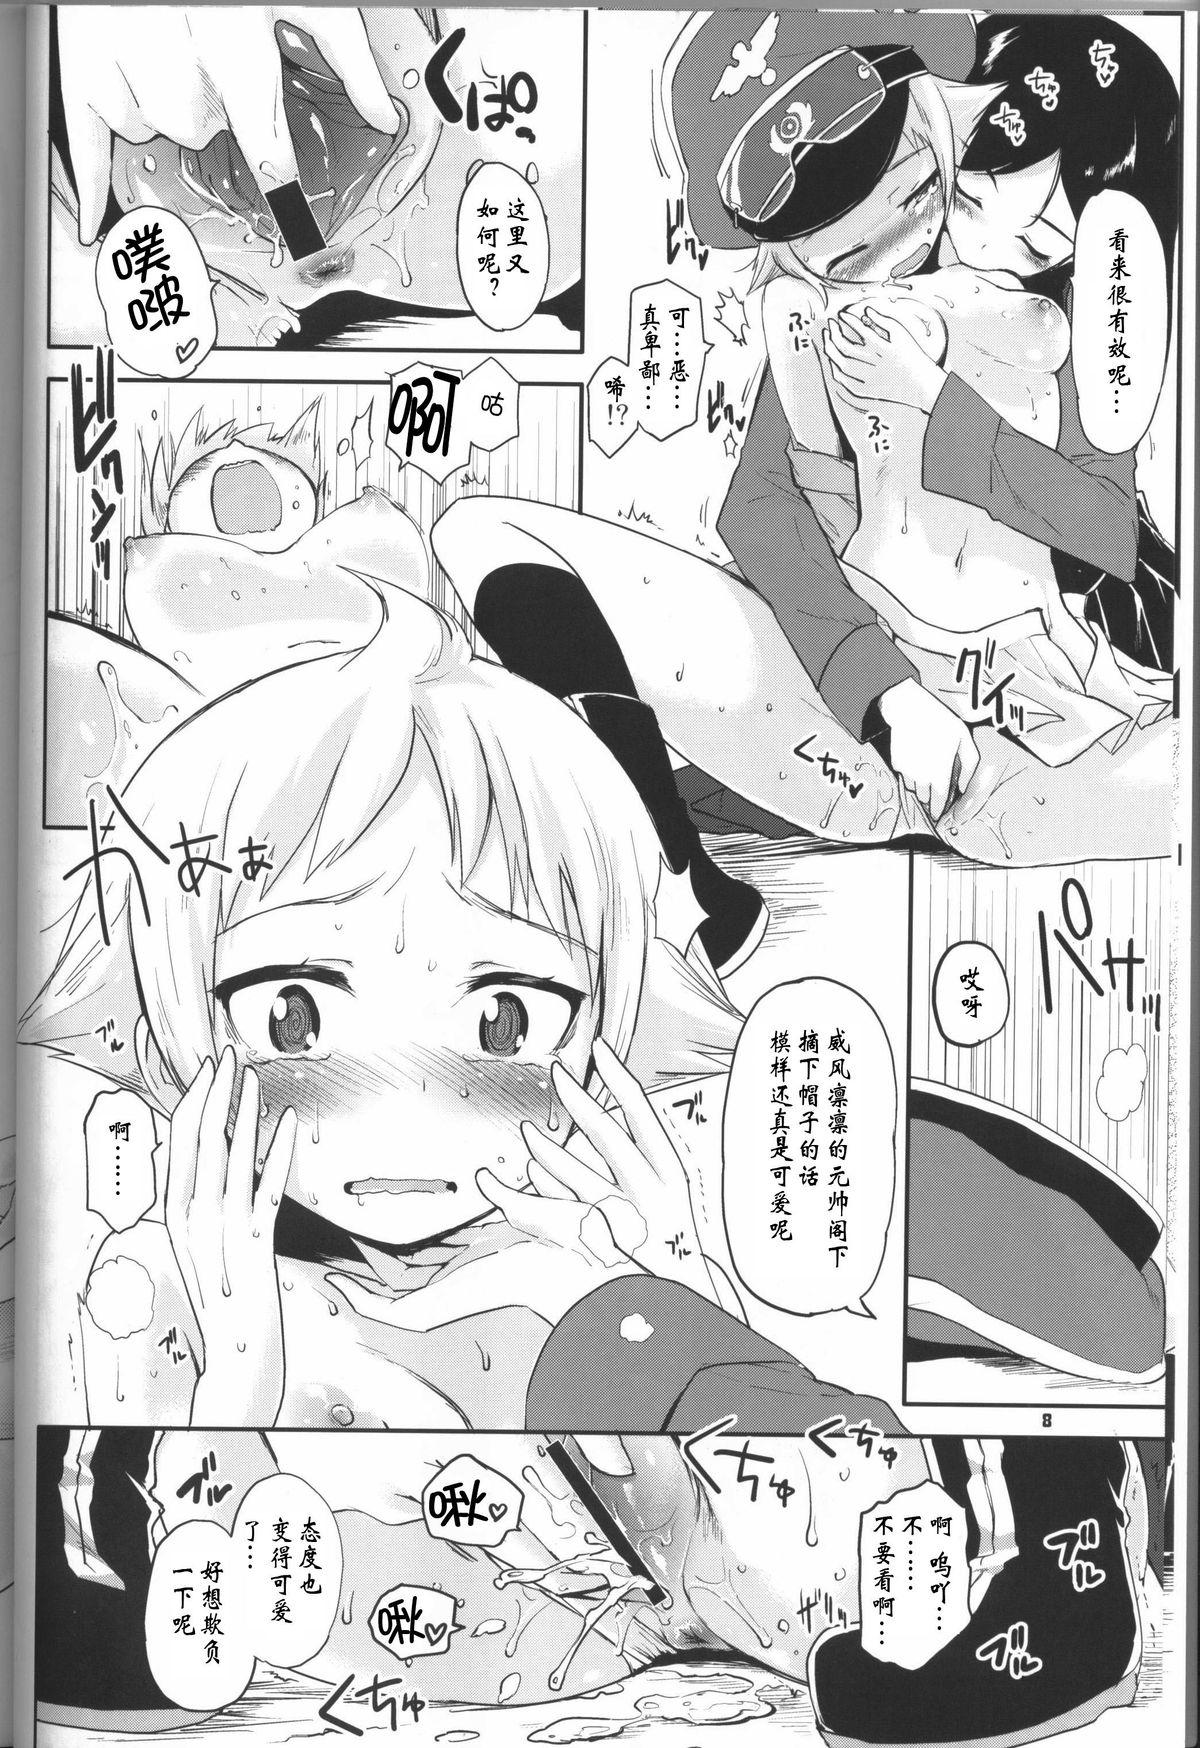 Gaping The General Frost Has Come! - Girls und panzer Hotwife - Page 7